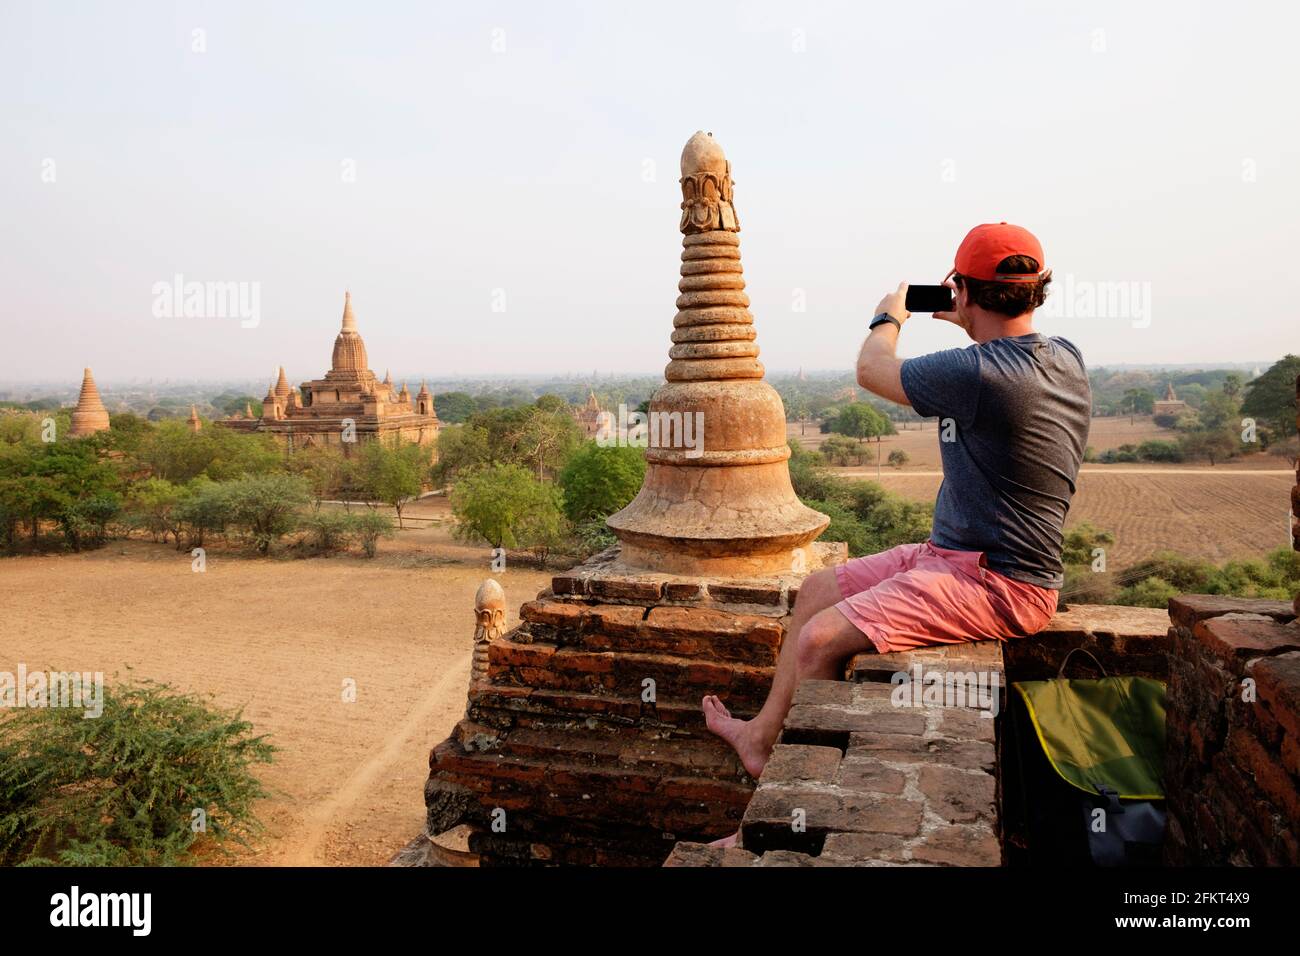 Man taking photograph from stone wall, Bagan Archaeological Zone, Buddhist temples, Mandalay, Myanmar Stock Photo